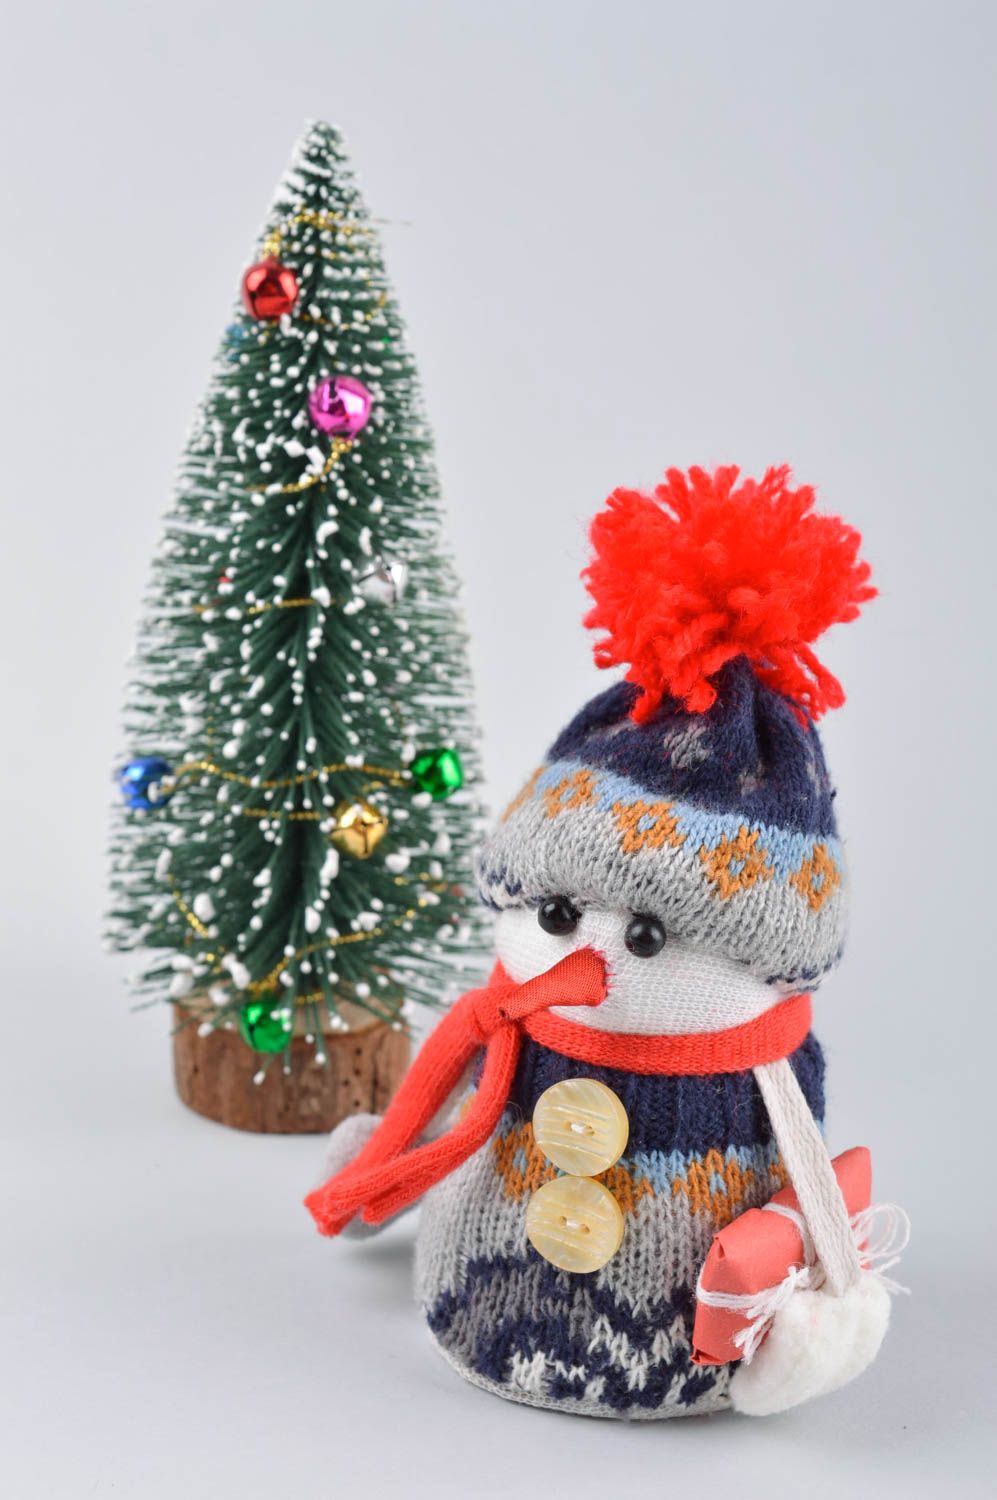 Handmade Christmas interior ideas soft toy present for kids decorative use only photo 1